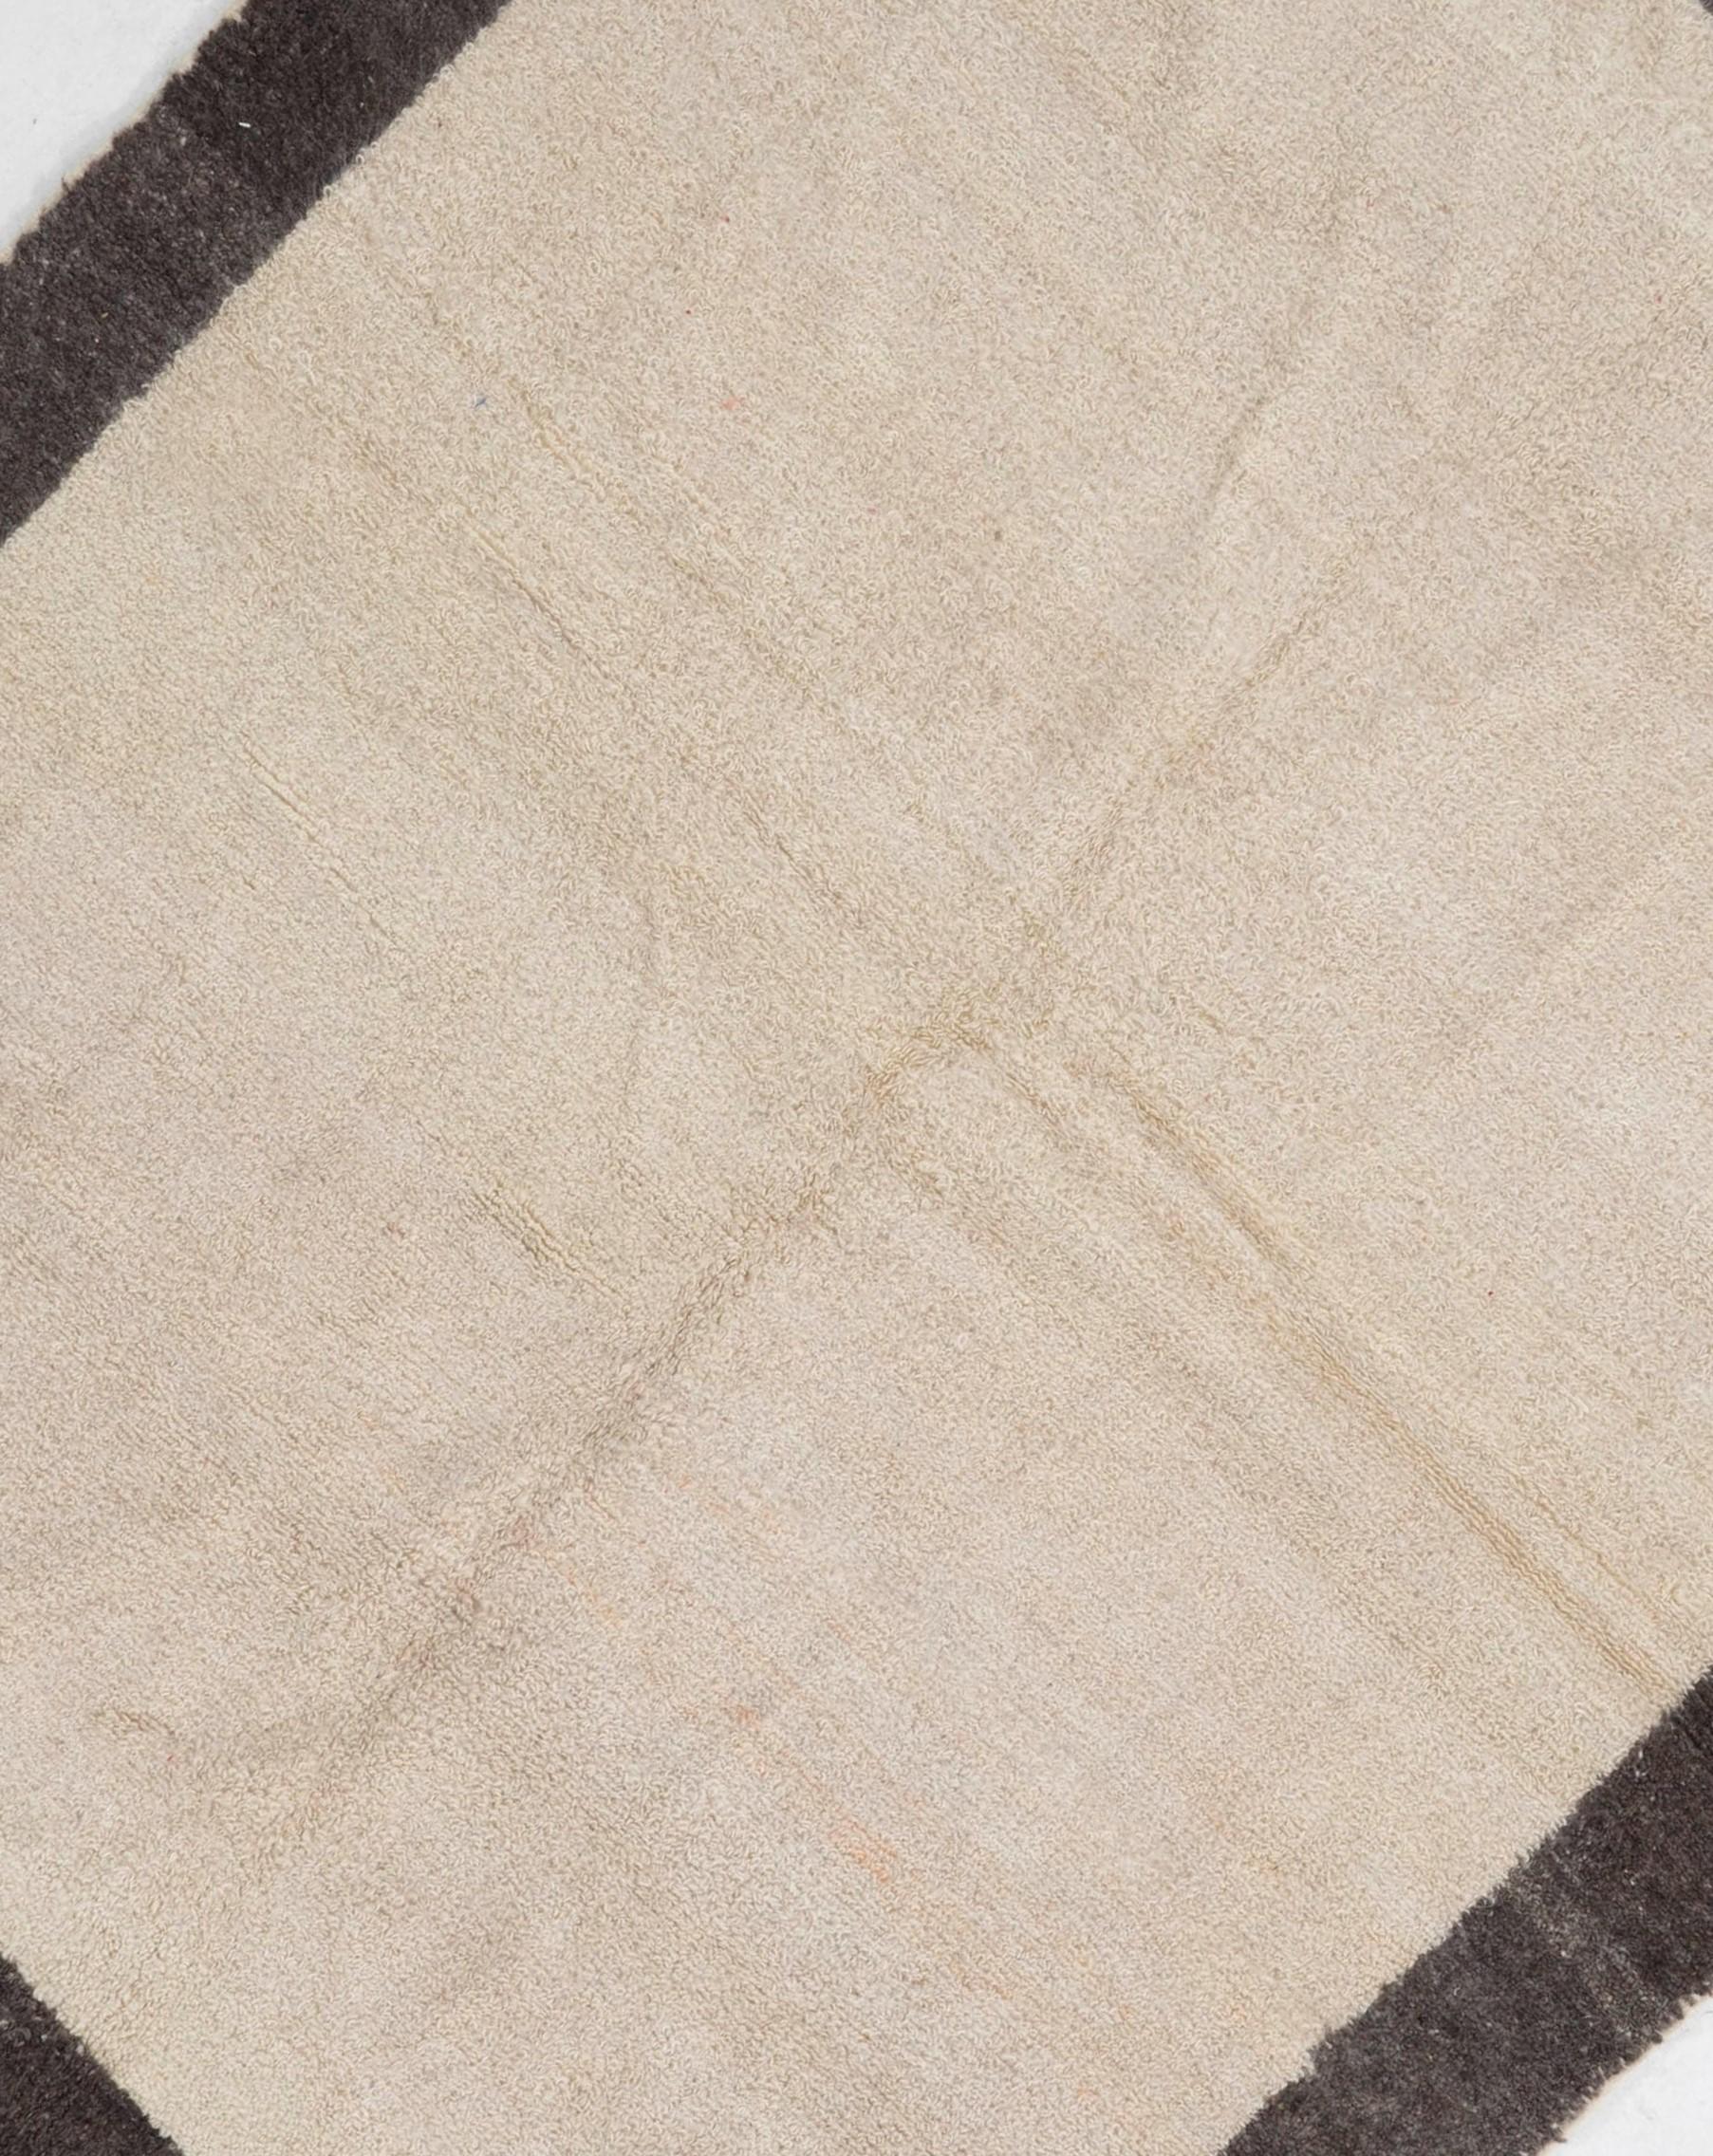 5x6 Vintage Tulu Rug Made of Natural Un-dyed Cream and Gray Wool, Custom Options In Good Condition For Sale In Philadelphia, PA